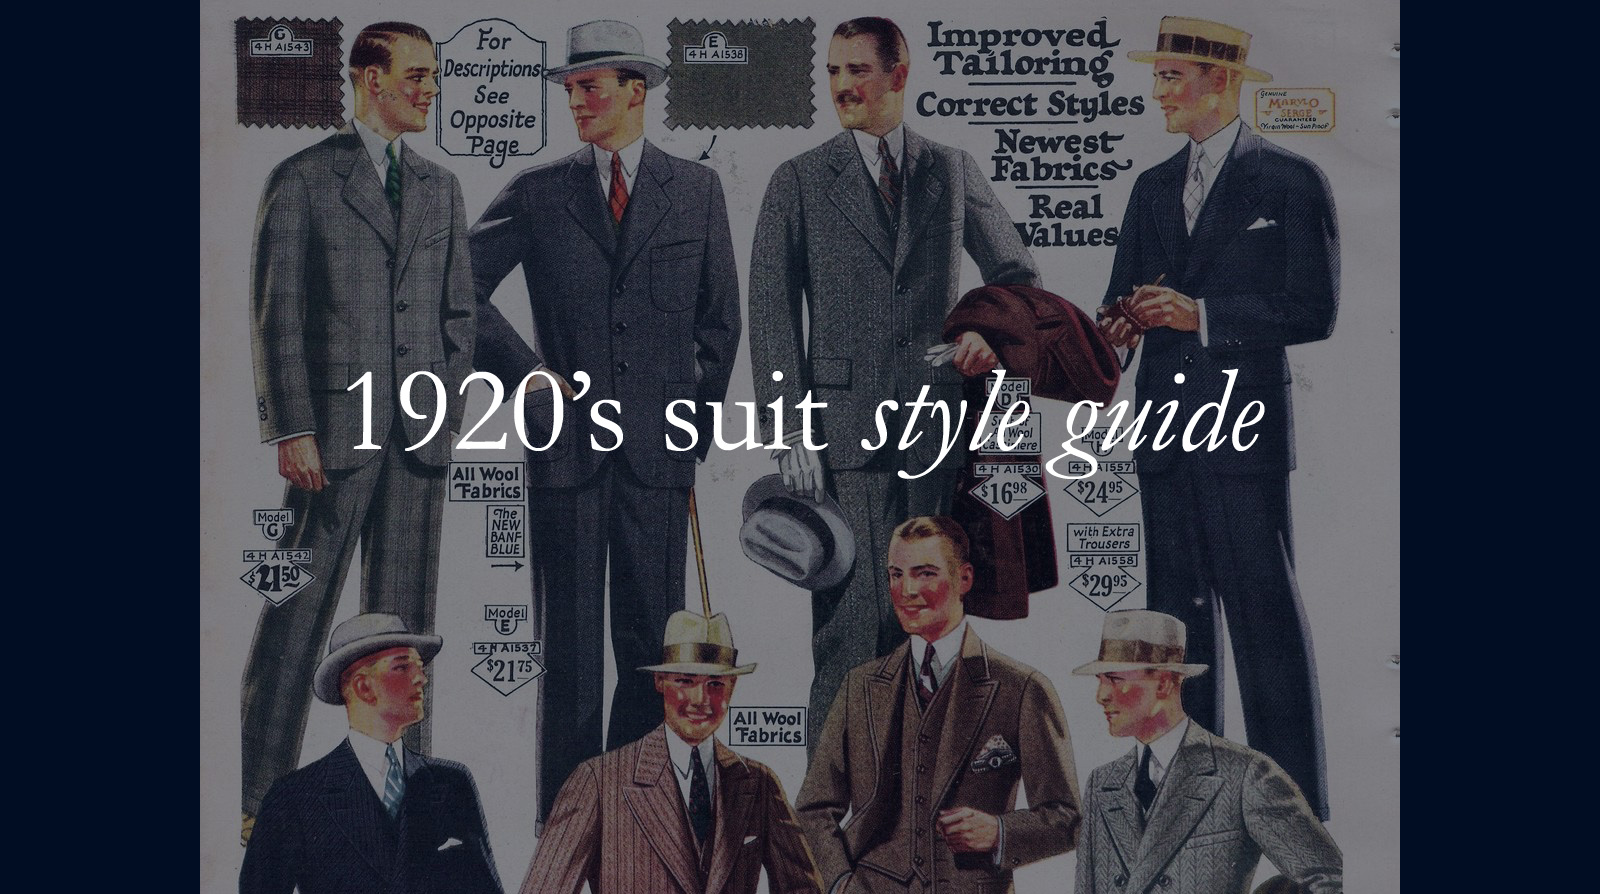 1920's mens suit style guide